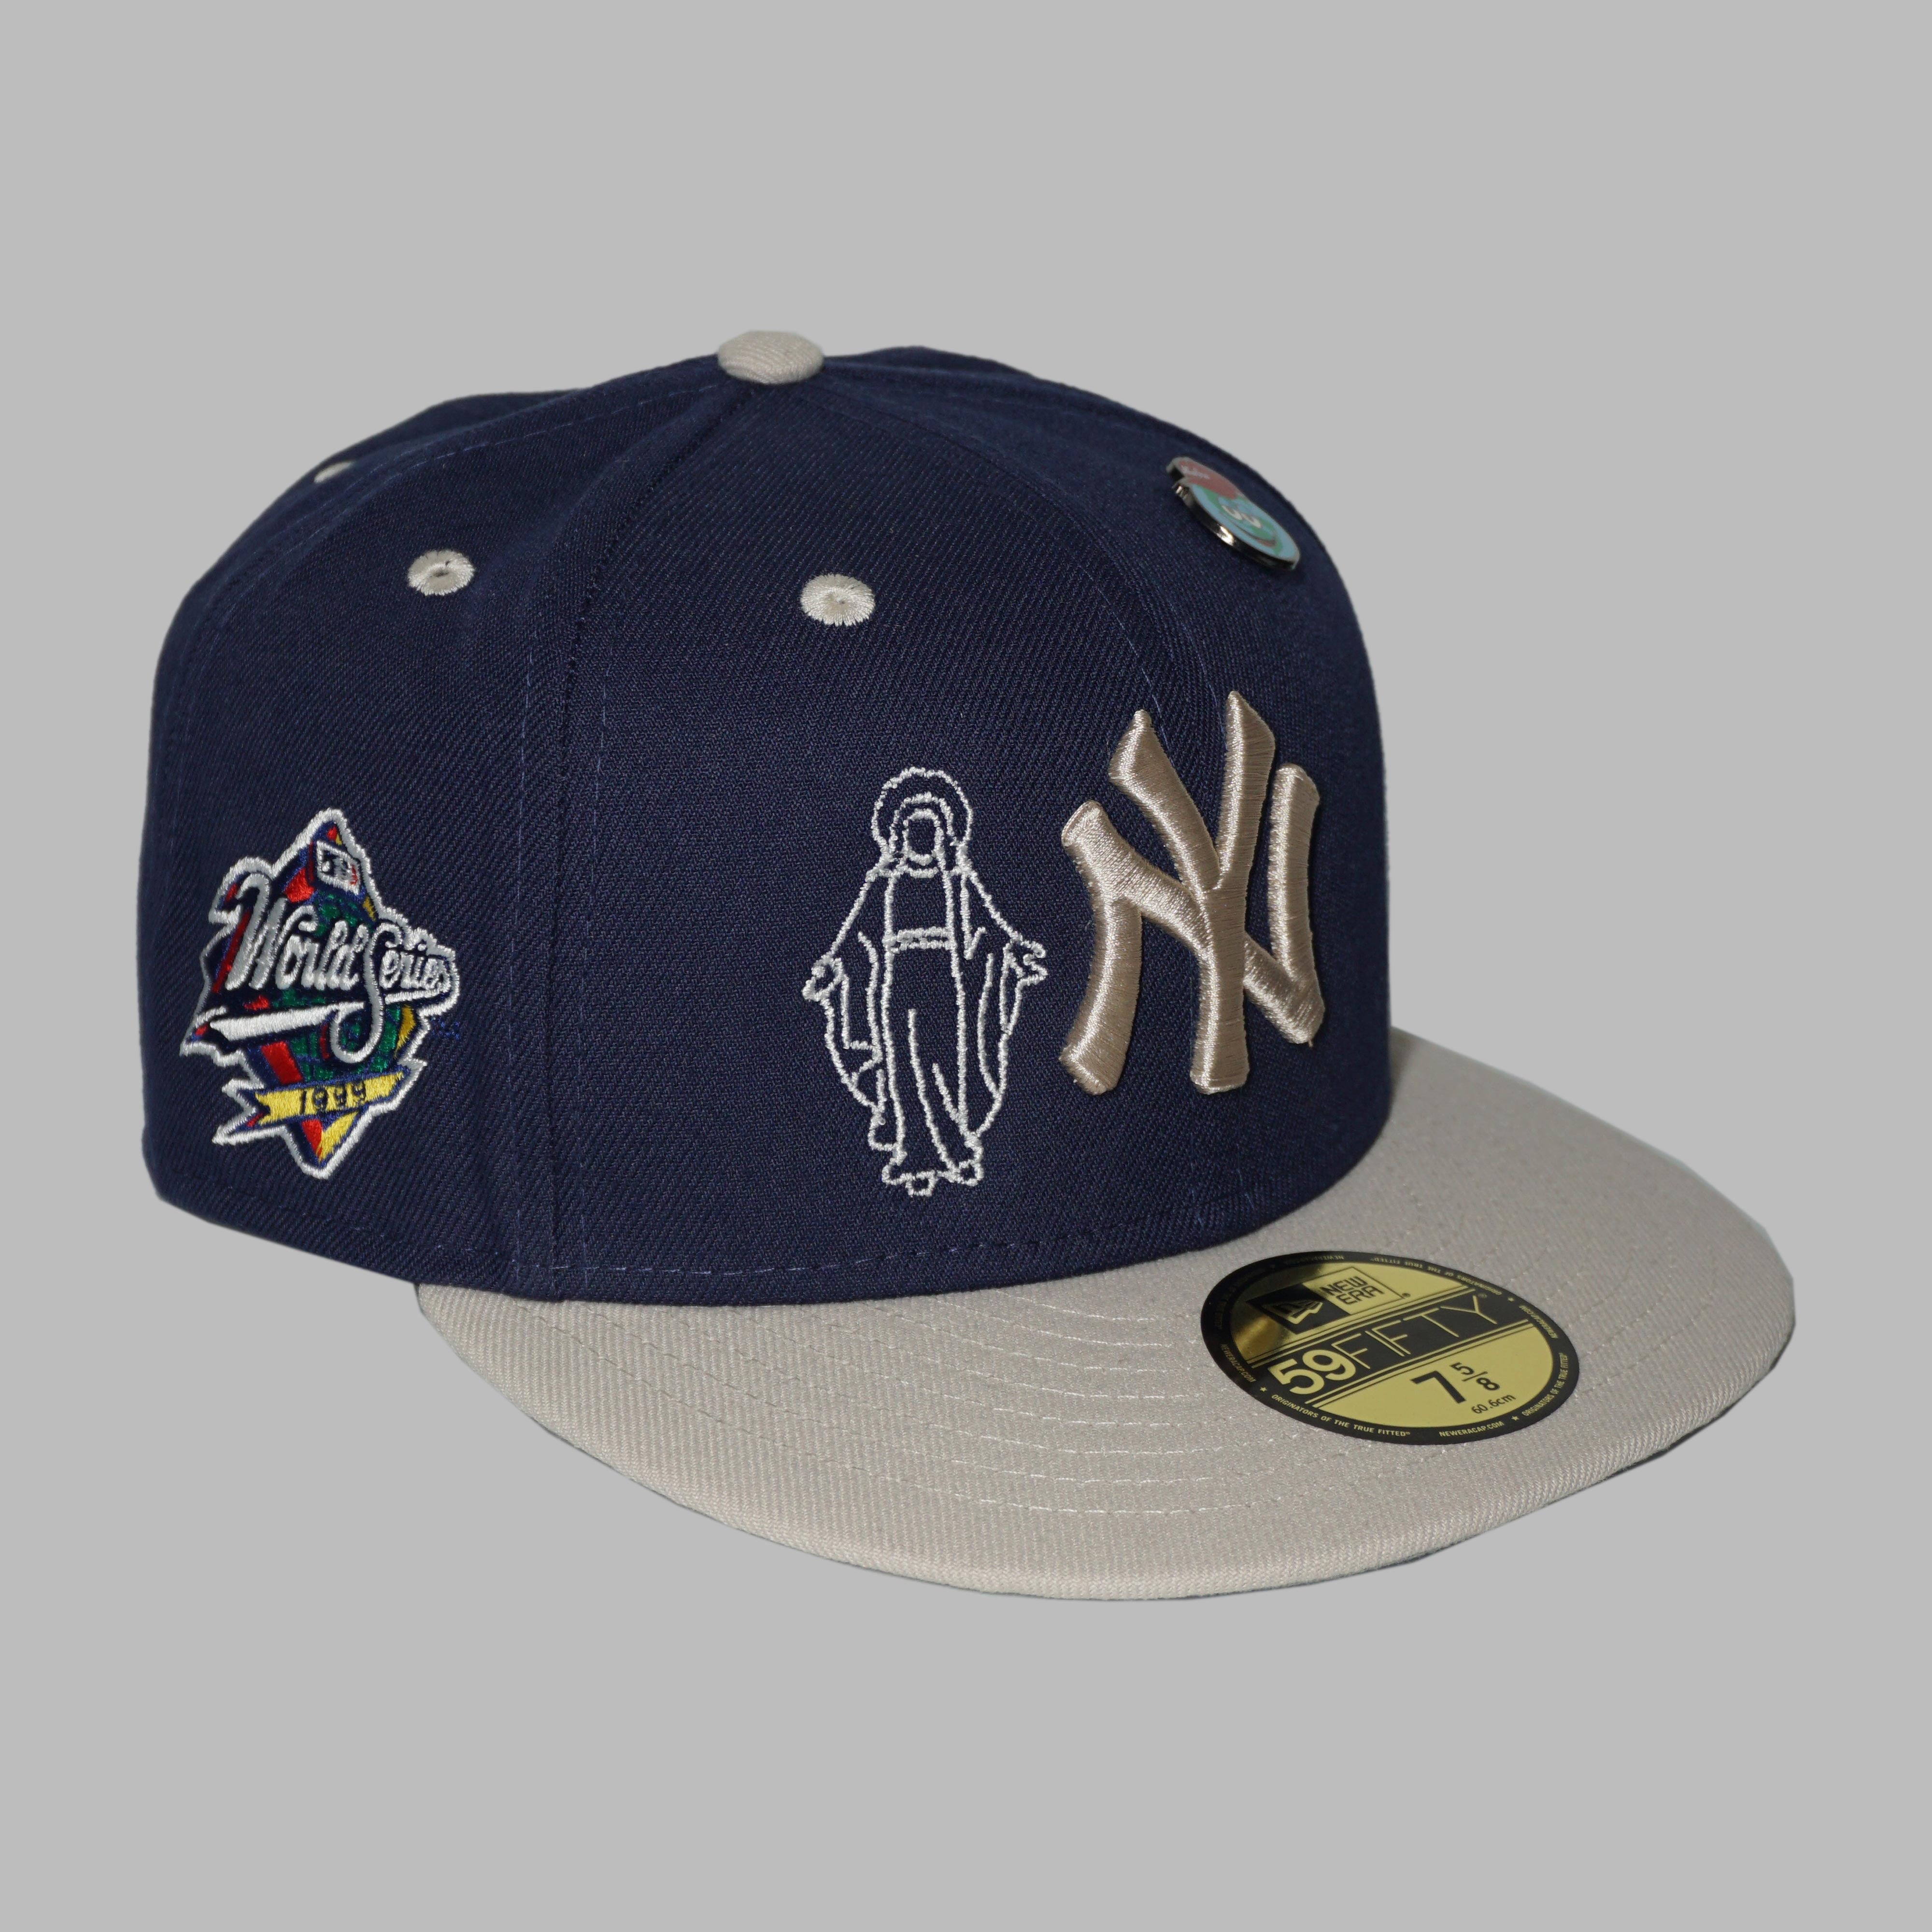 NAVY HOLY FITTED (size 7 5/8)